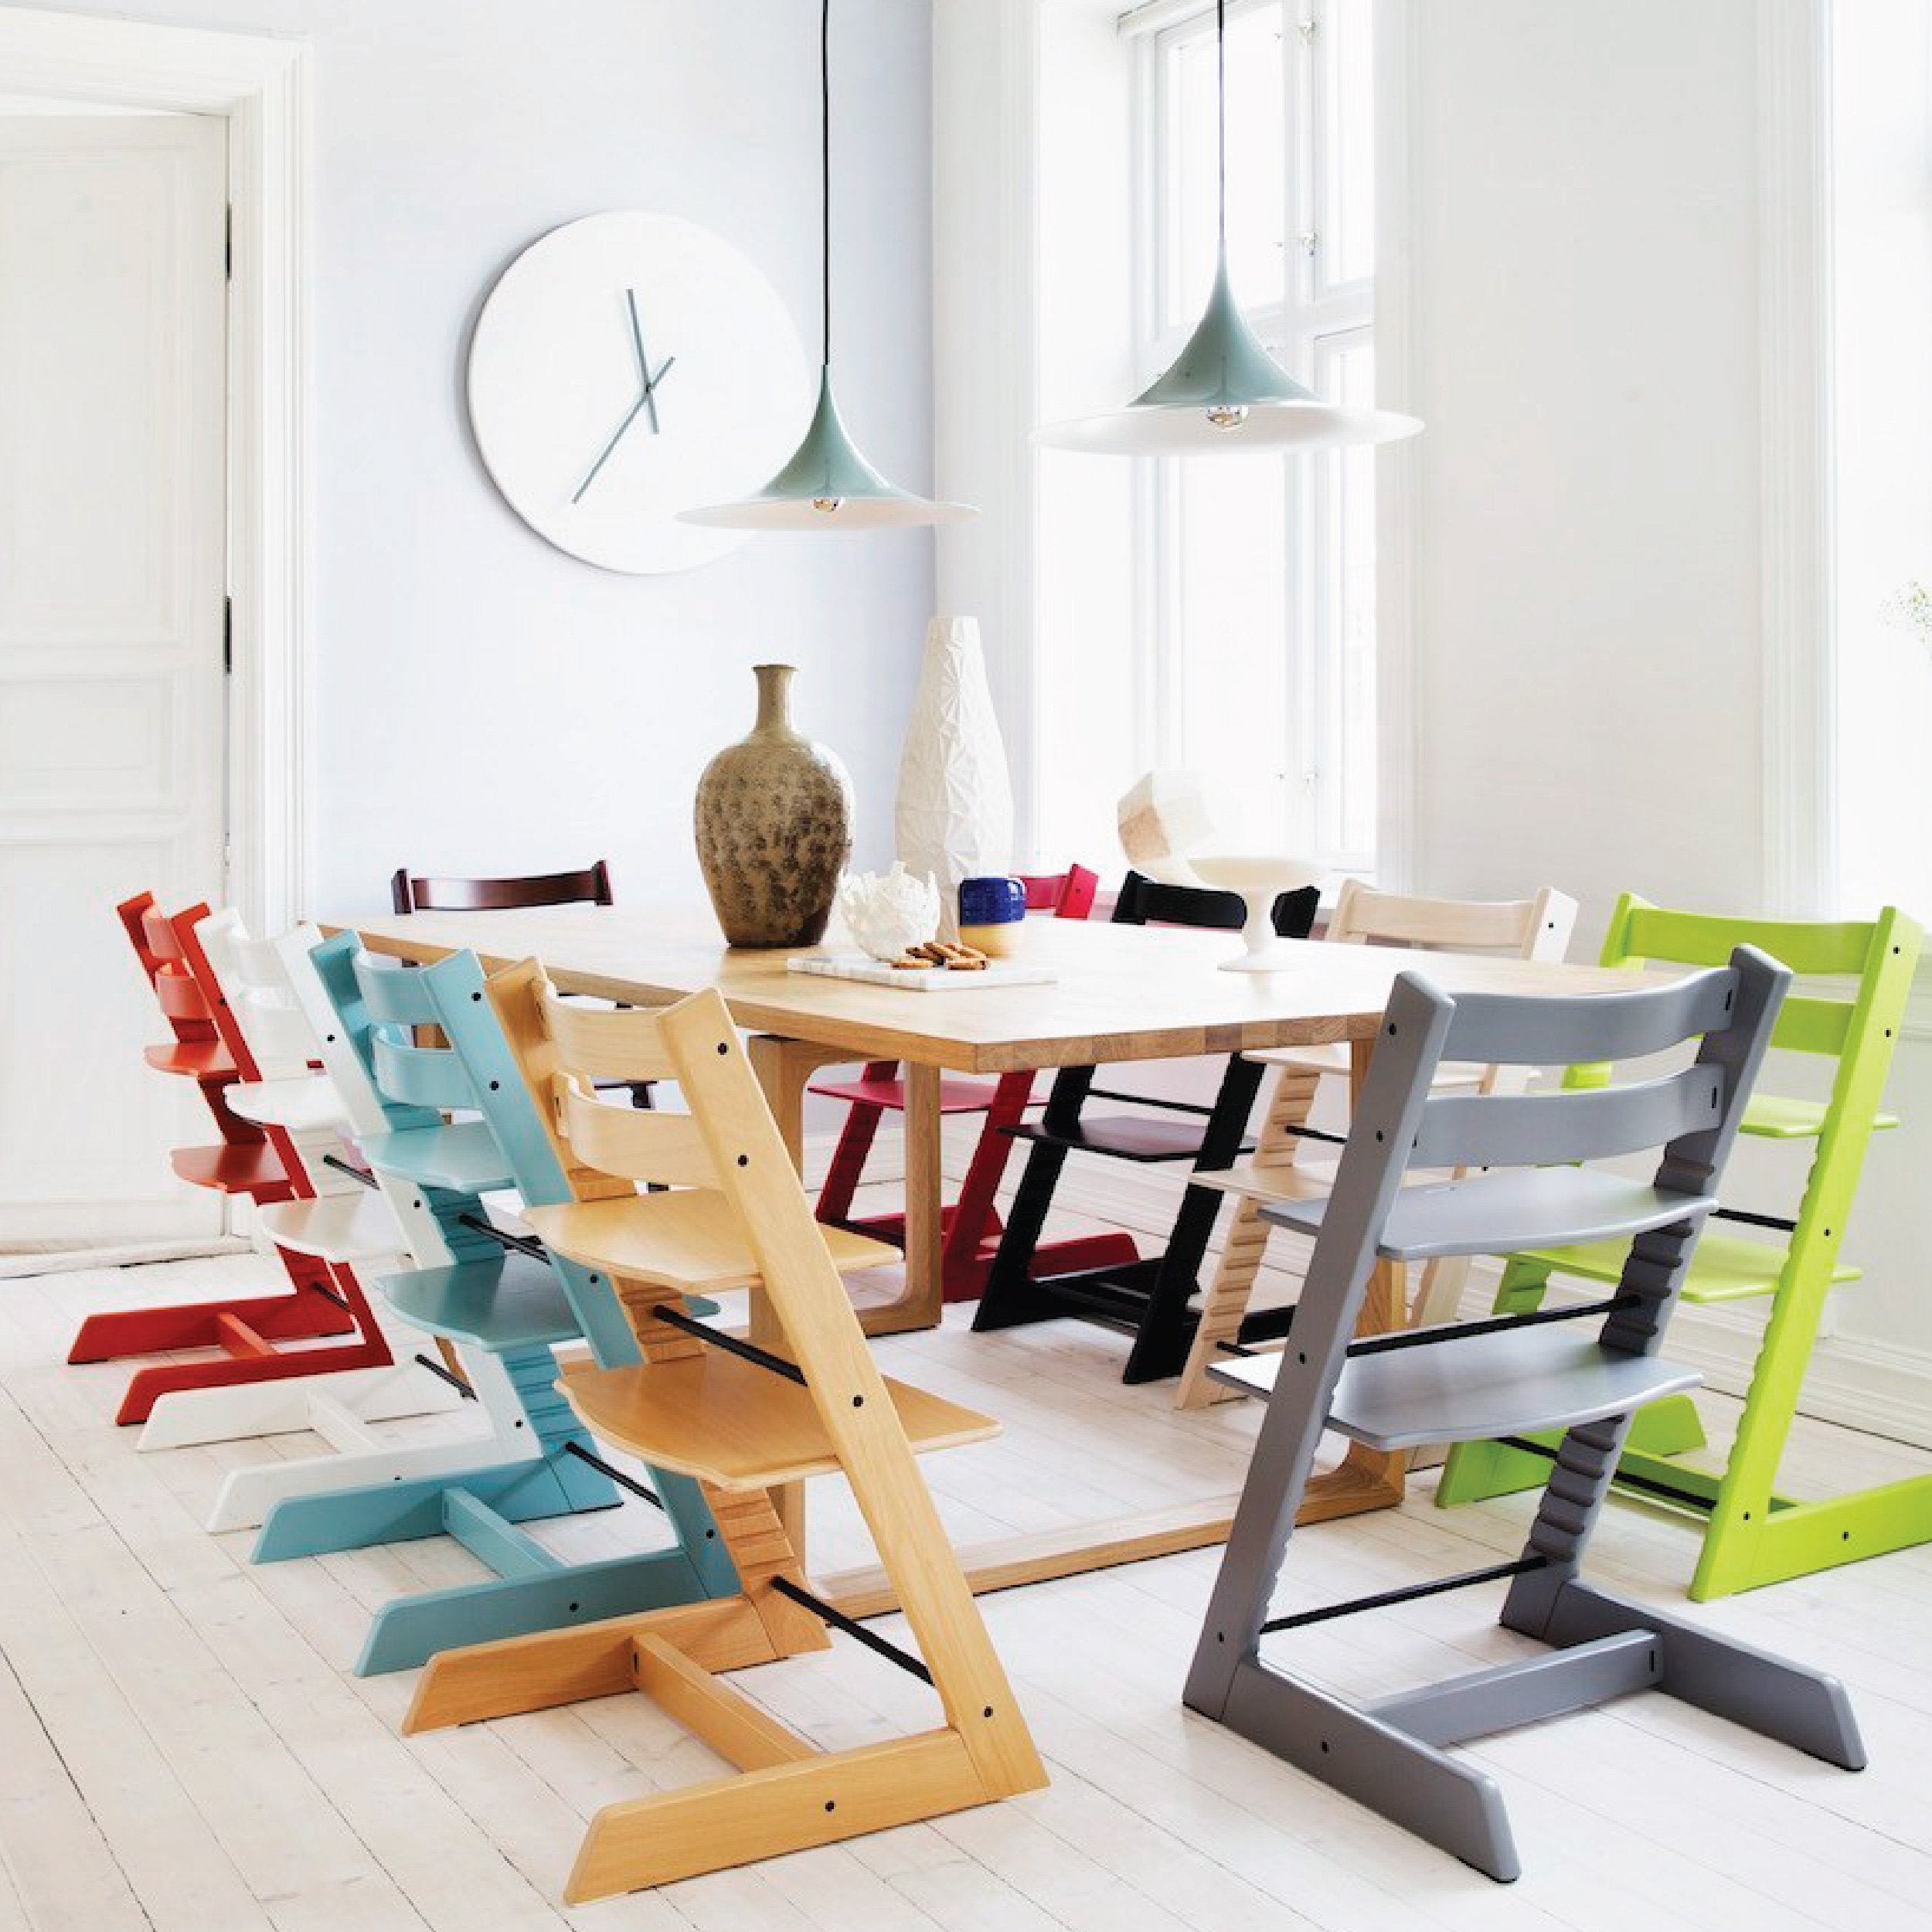 Stokke Tripp Trapp Chair (Natural) - Happikiddo.com